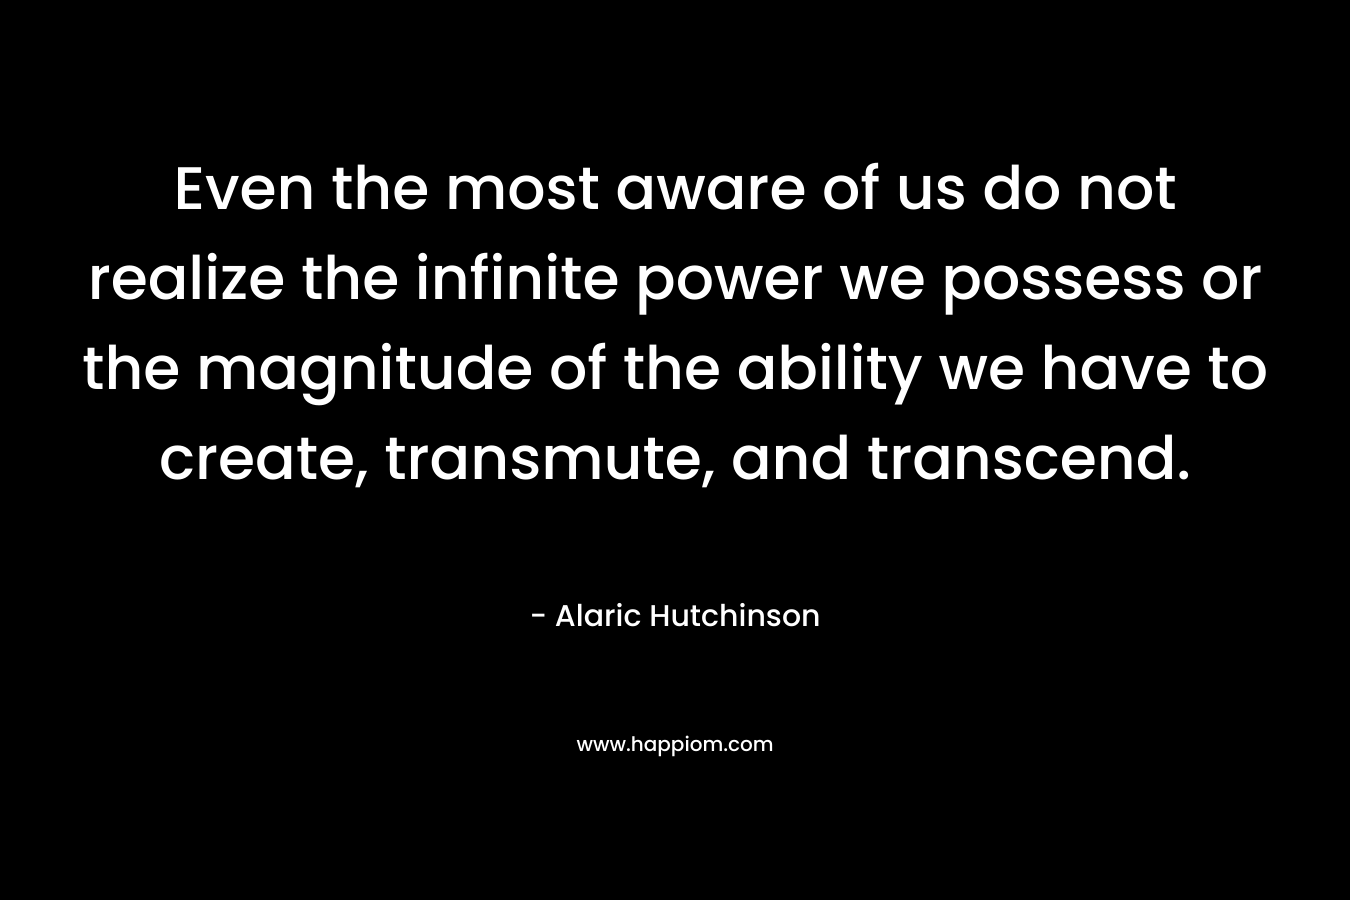 Even the most aware of us do not realize the infinite power we possess or the magnitude of the ability we have to create, transmute, and transcend.